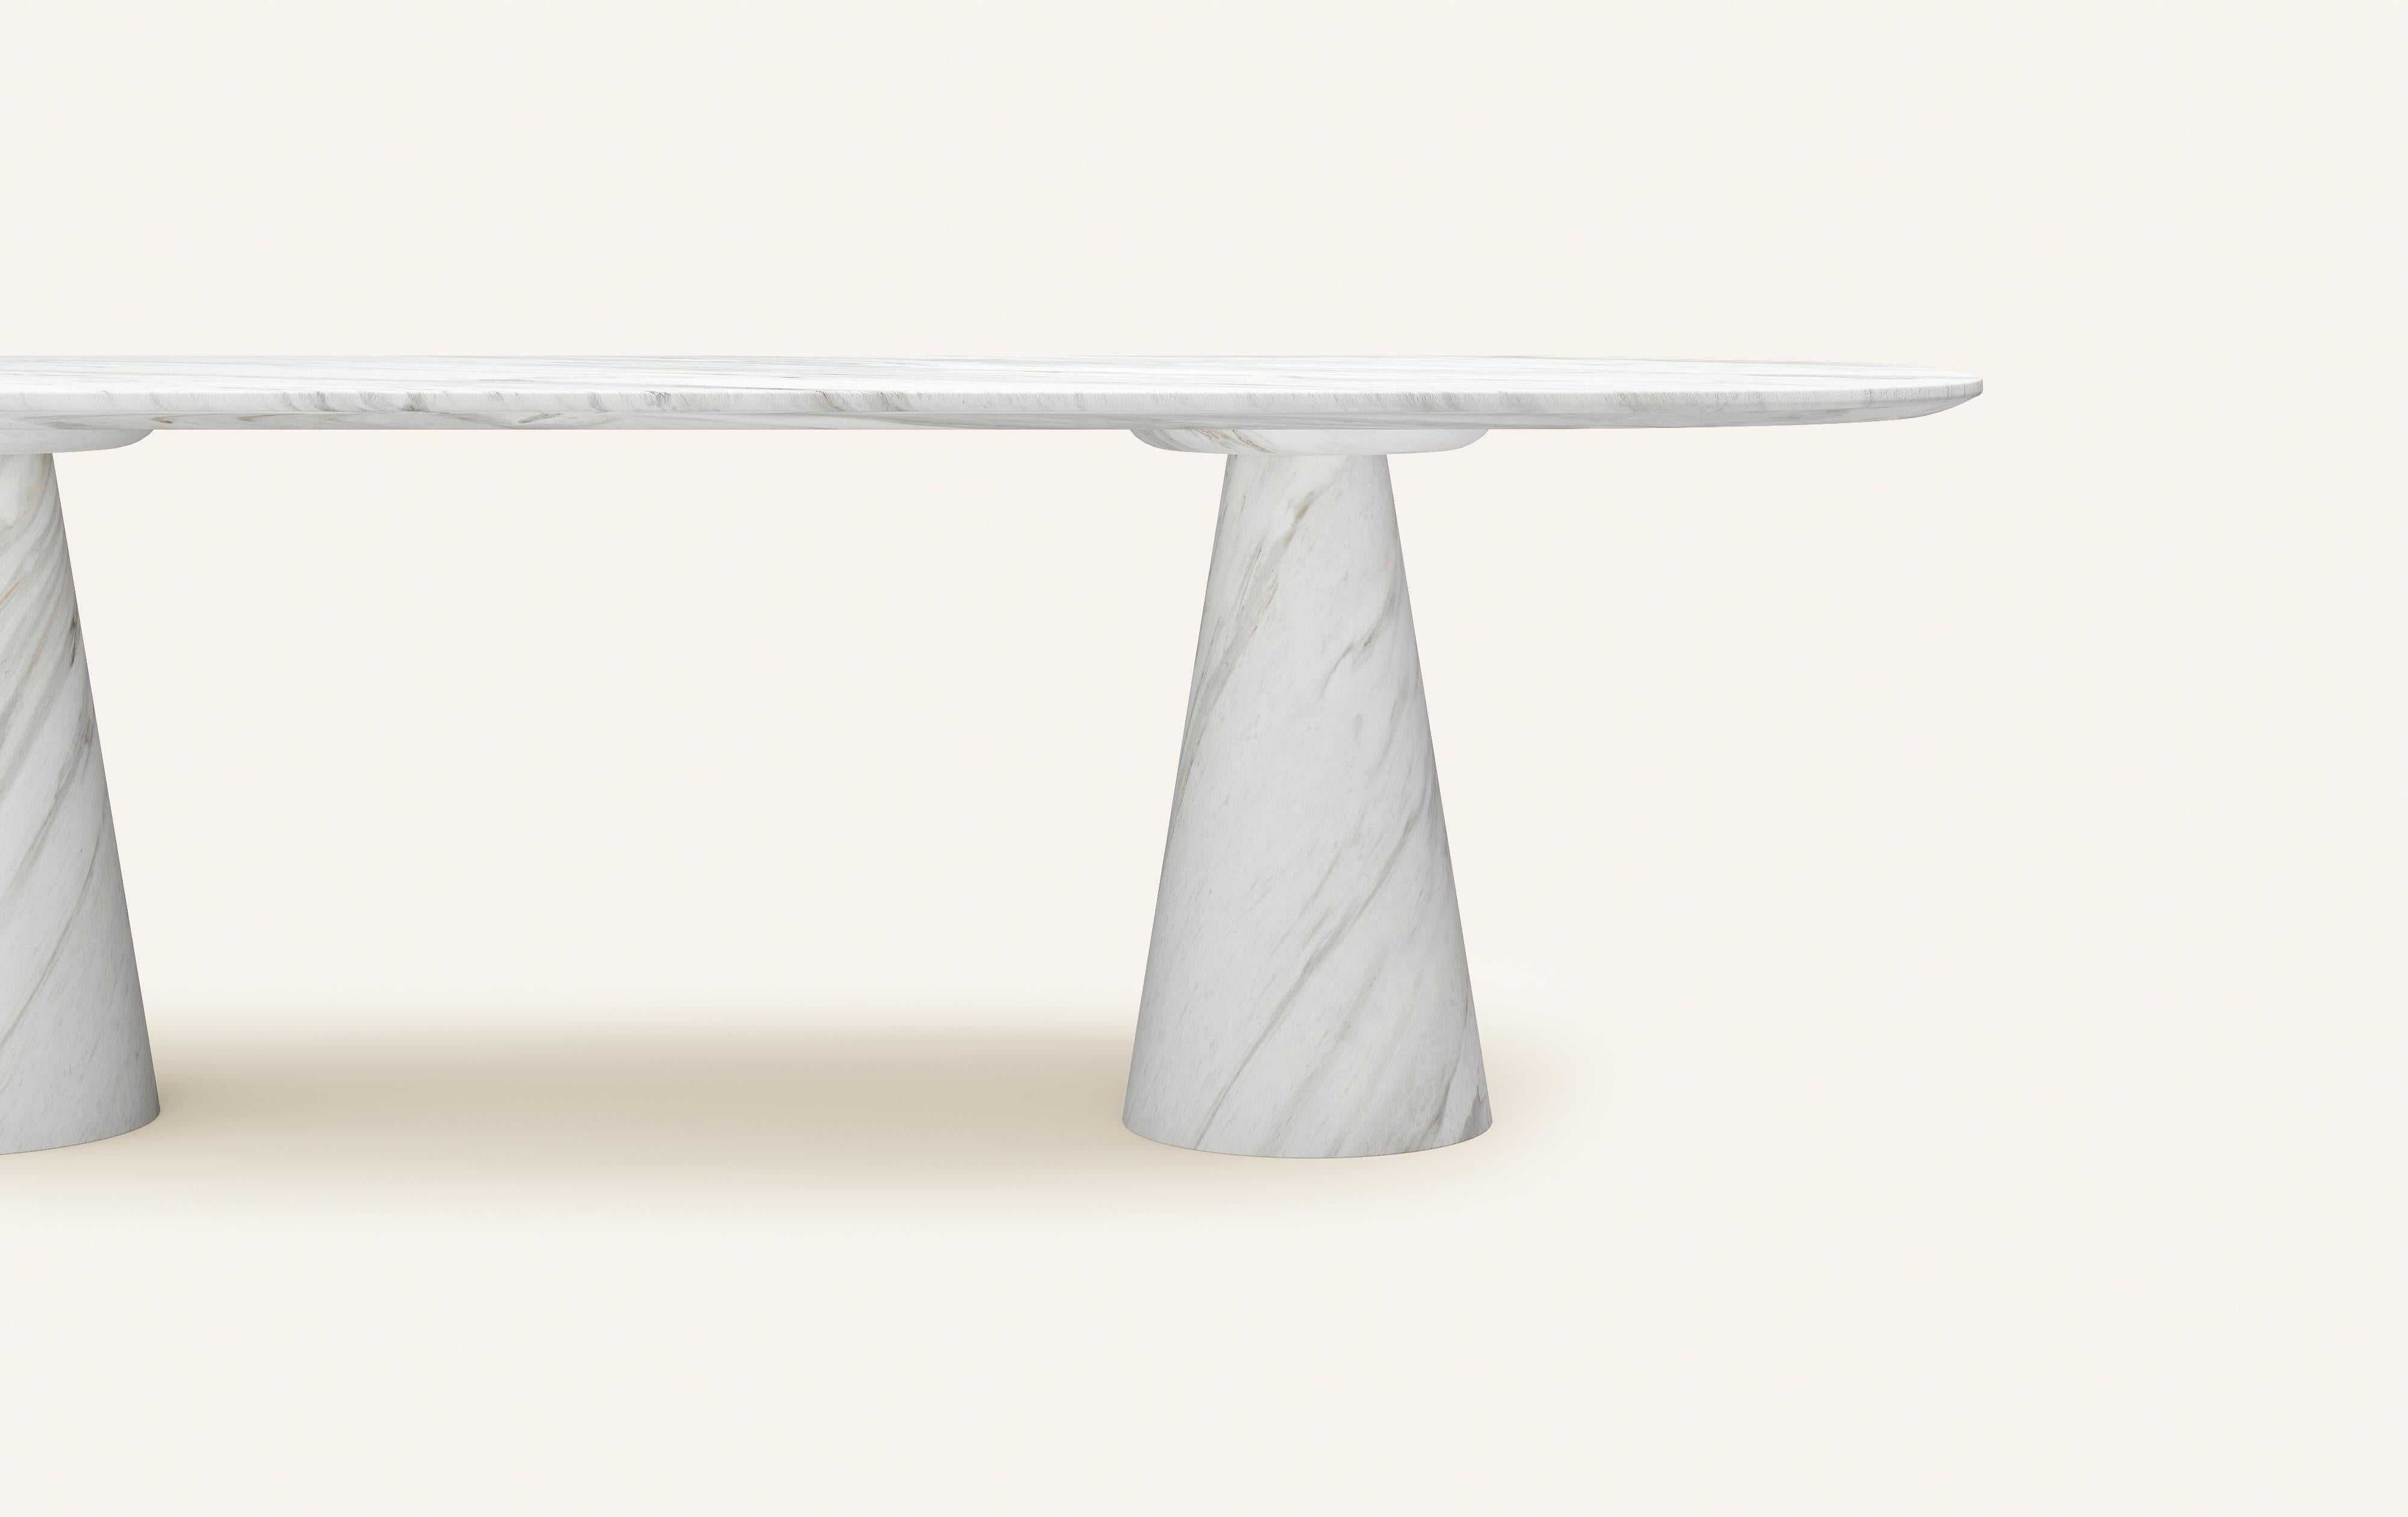 American FORM(LA) Cono Oval Dining Table 108”L x 48”W x 30”H Volakas White Marble For Sale